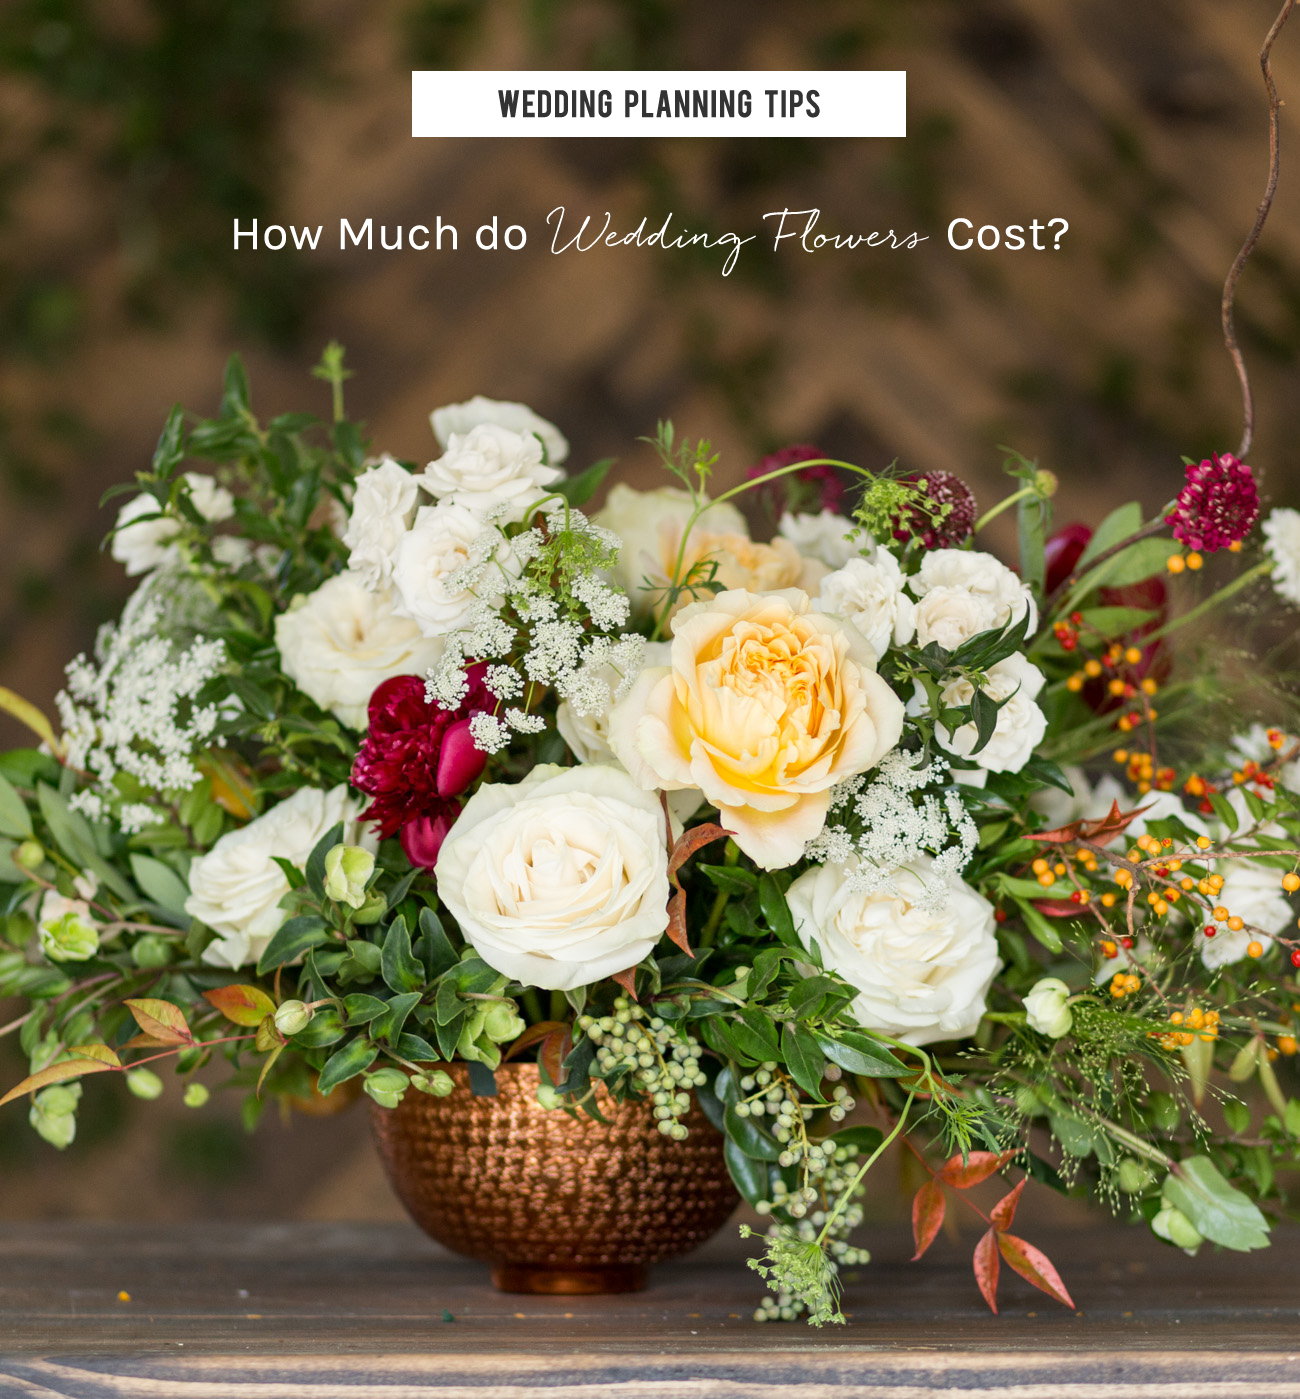 Wedding Planning Tips: Budgeting for Centerpieces